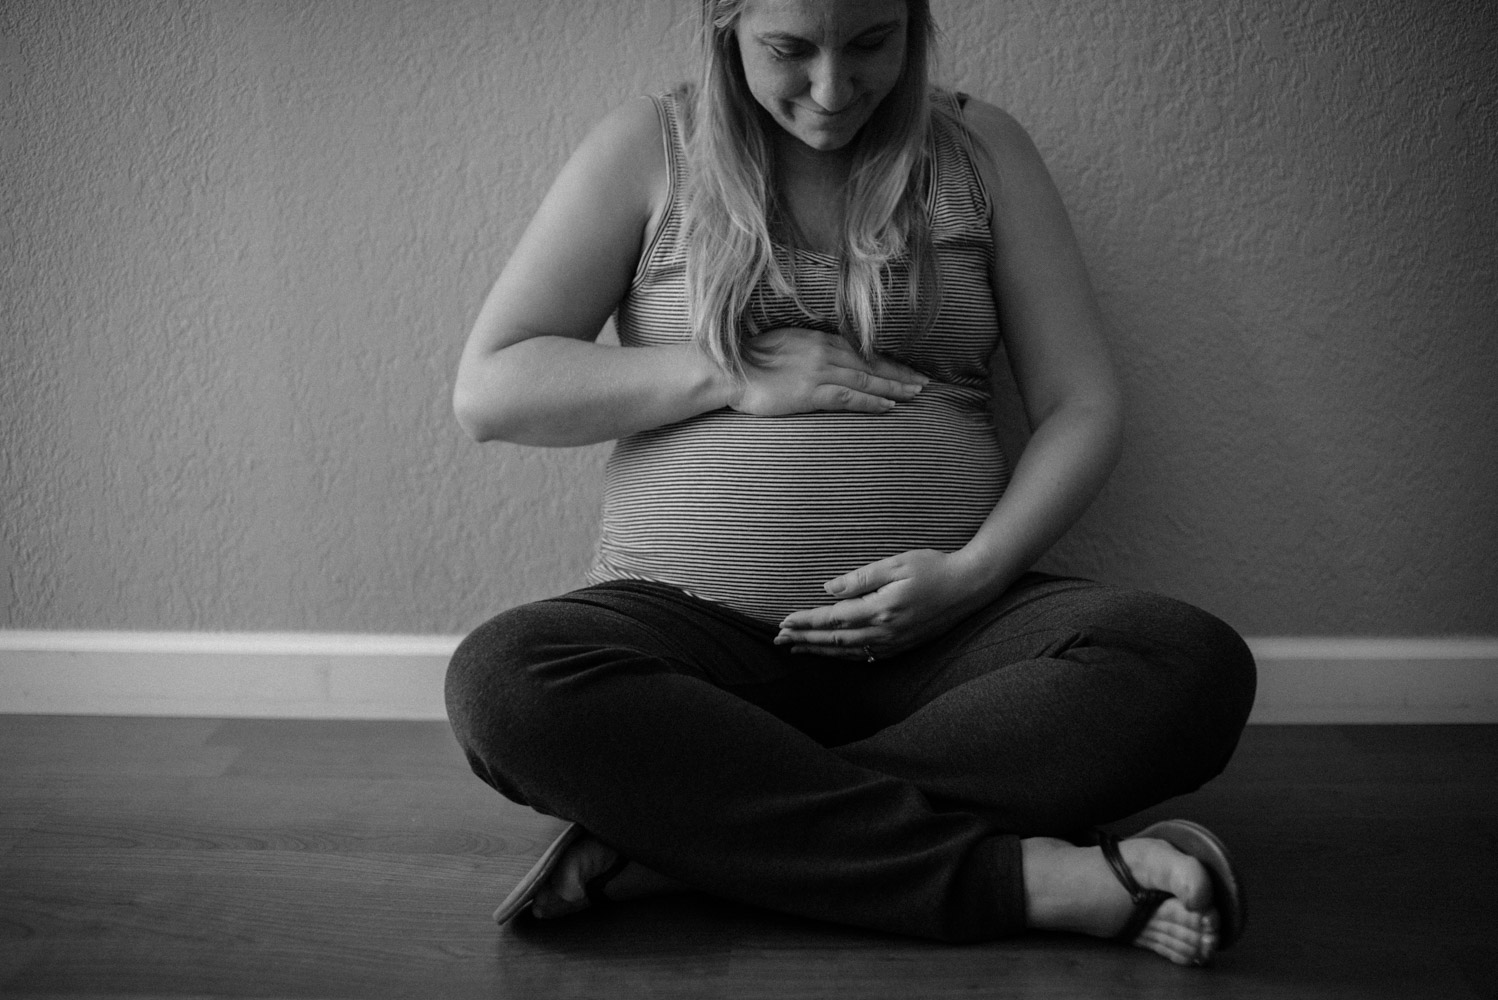 Pregnant mother sitting on floor.